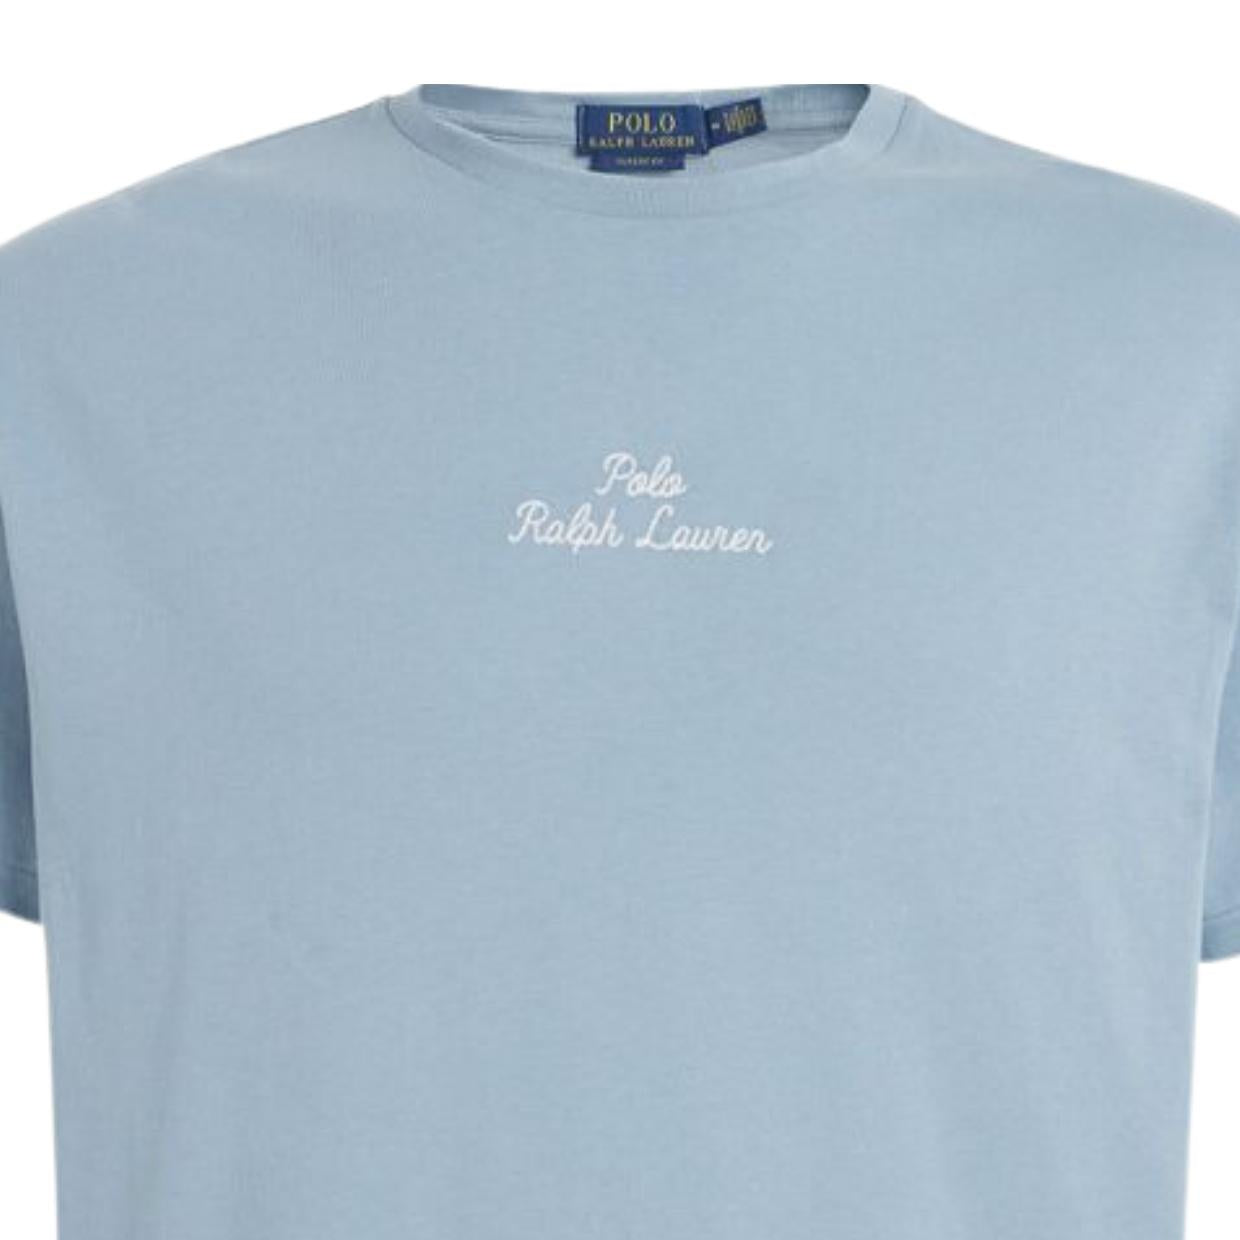 Polo Ralph Lauren Embroidered Logo Classic Fit Blue T-Shirt